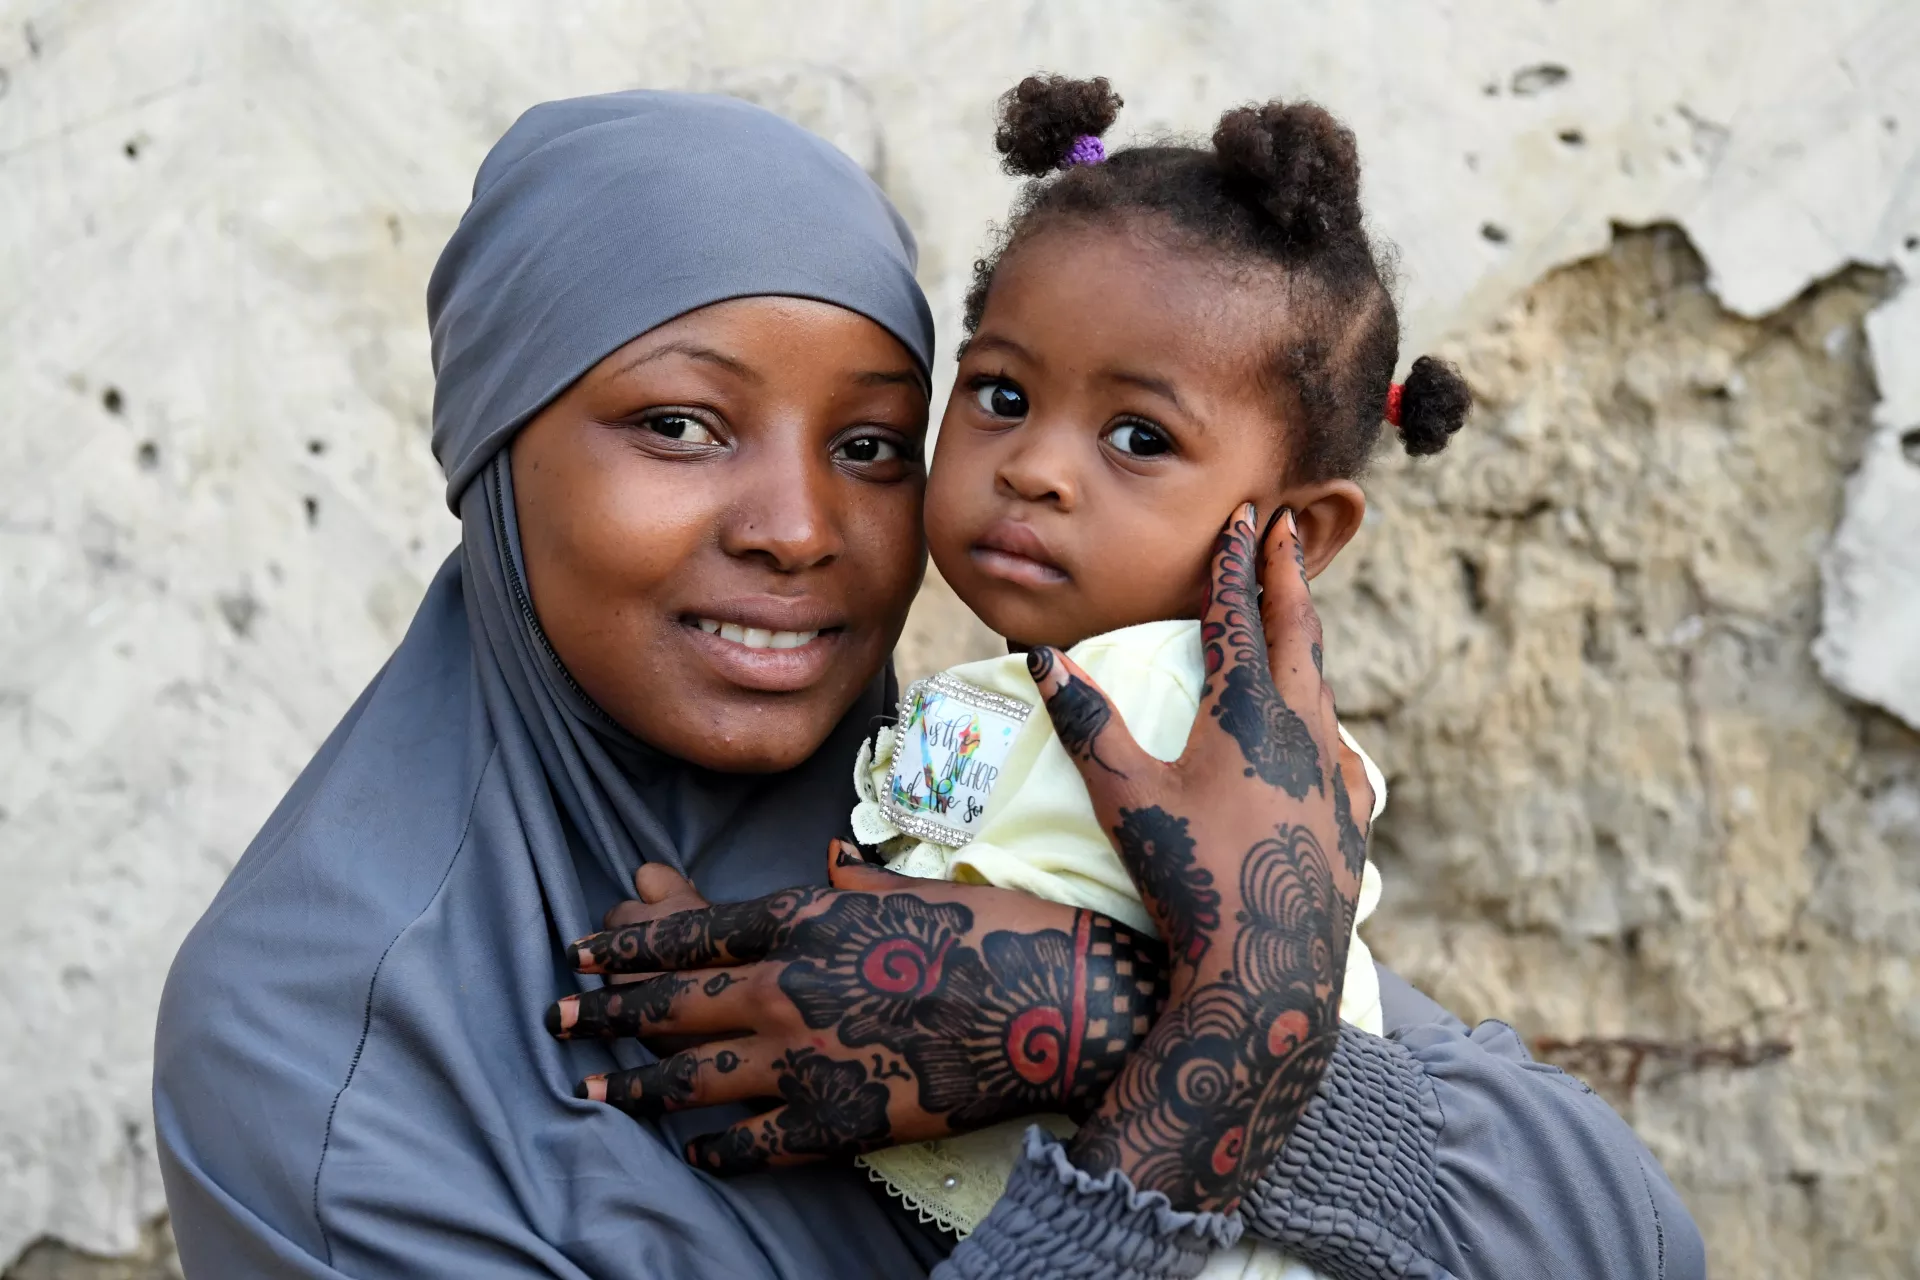 Barira Mamoudou, an 18 years old girl, with her daughter Jamilla, in Diffa, Niger.